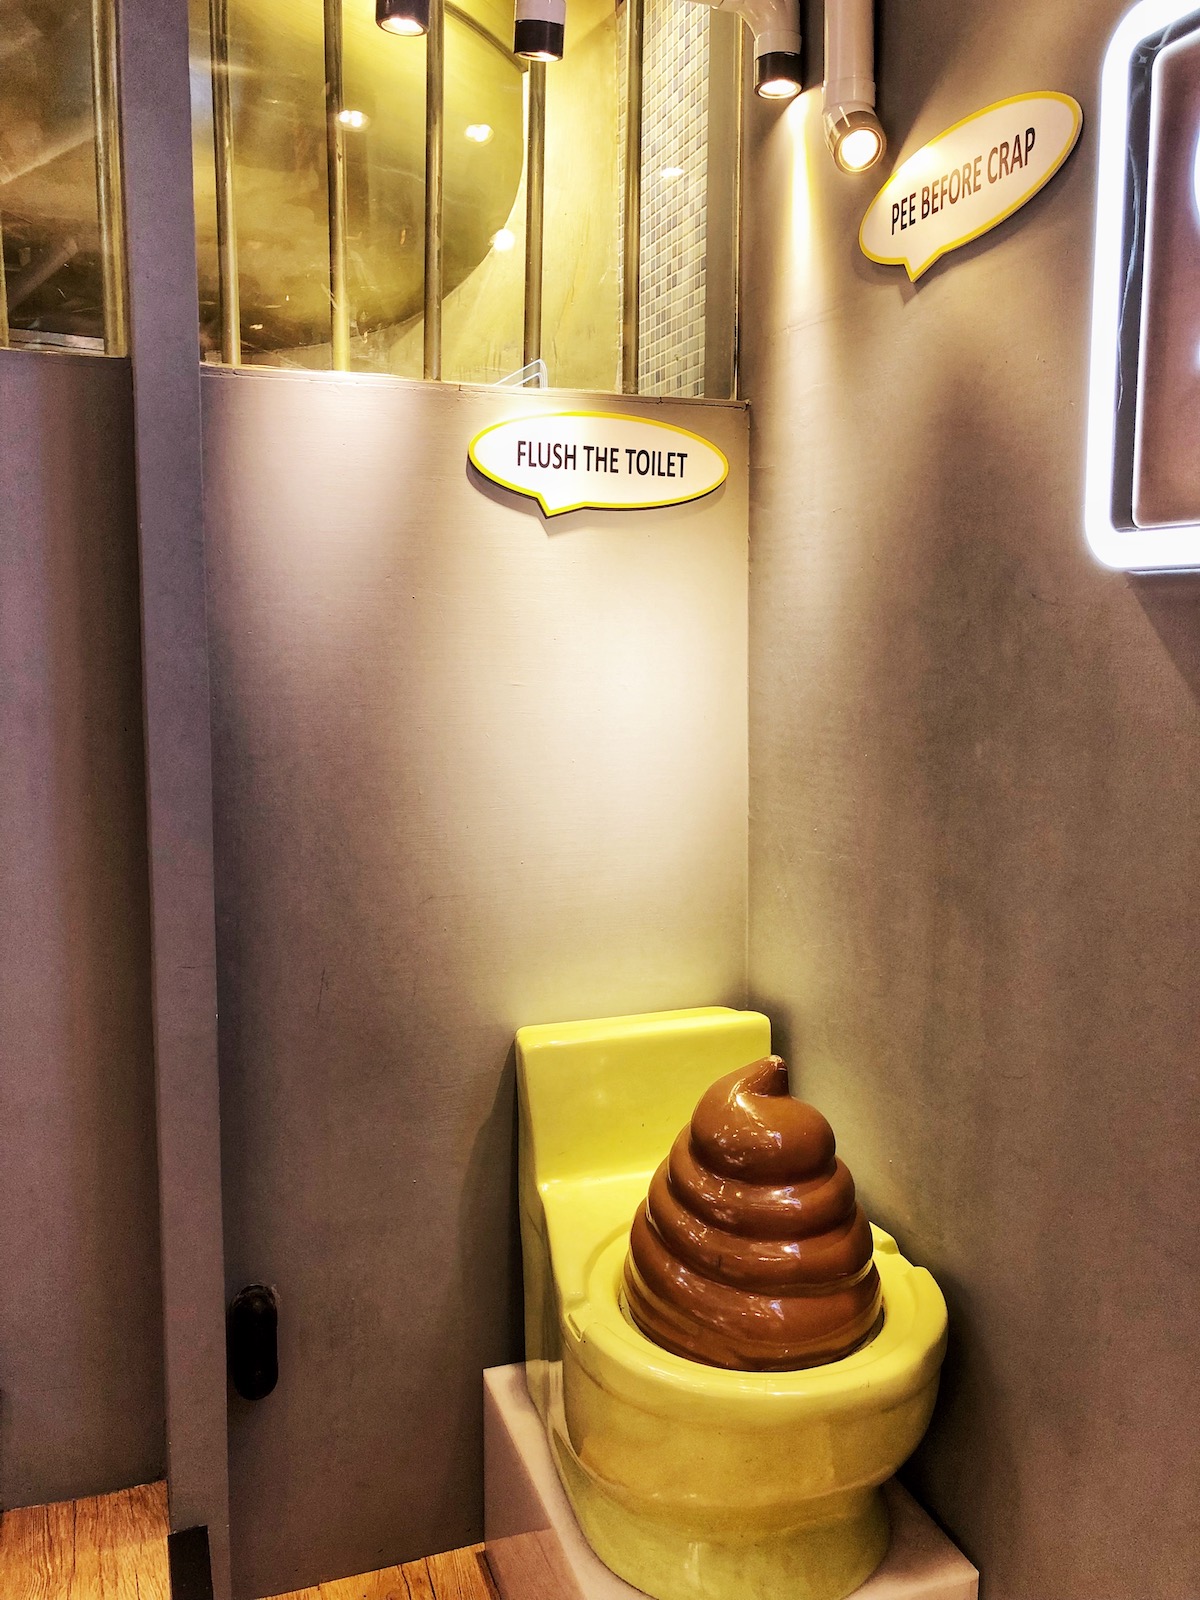 A plastic art of poo coming out of a toilet